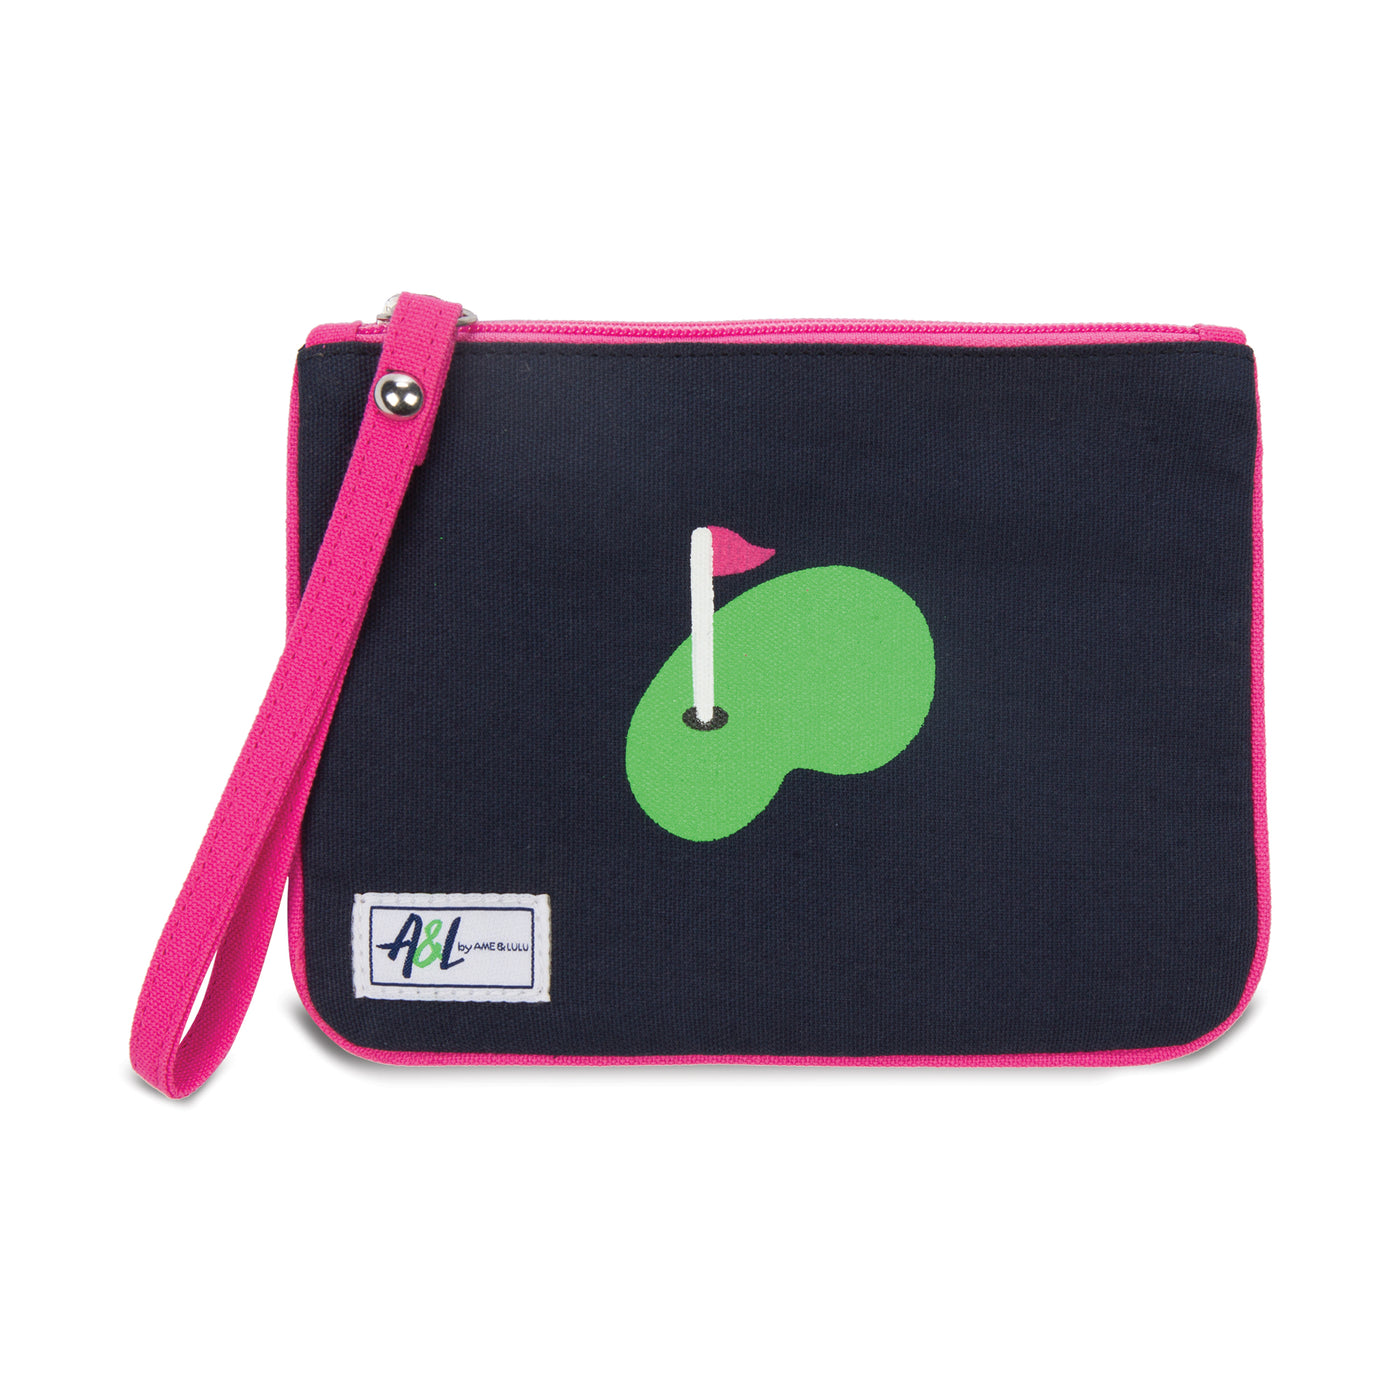 Small navy canvas wristlet with hot pink trim and strap. Front have a putting green and small pink golf flag printed on the front